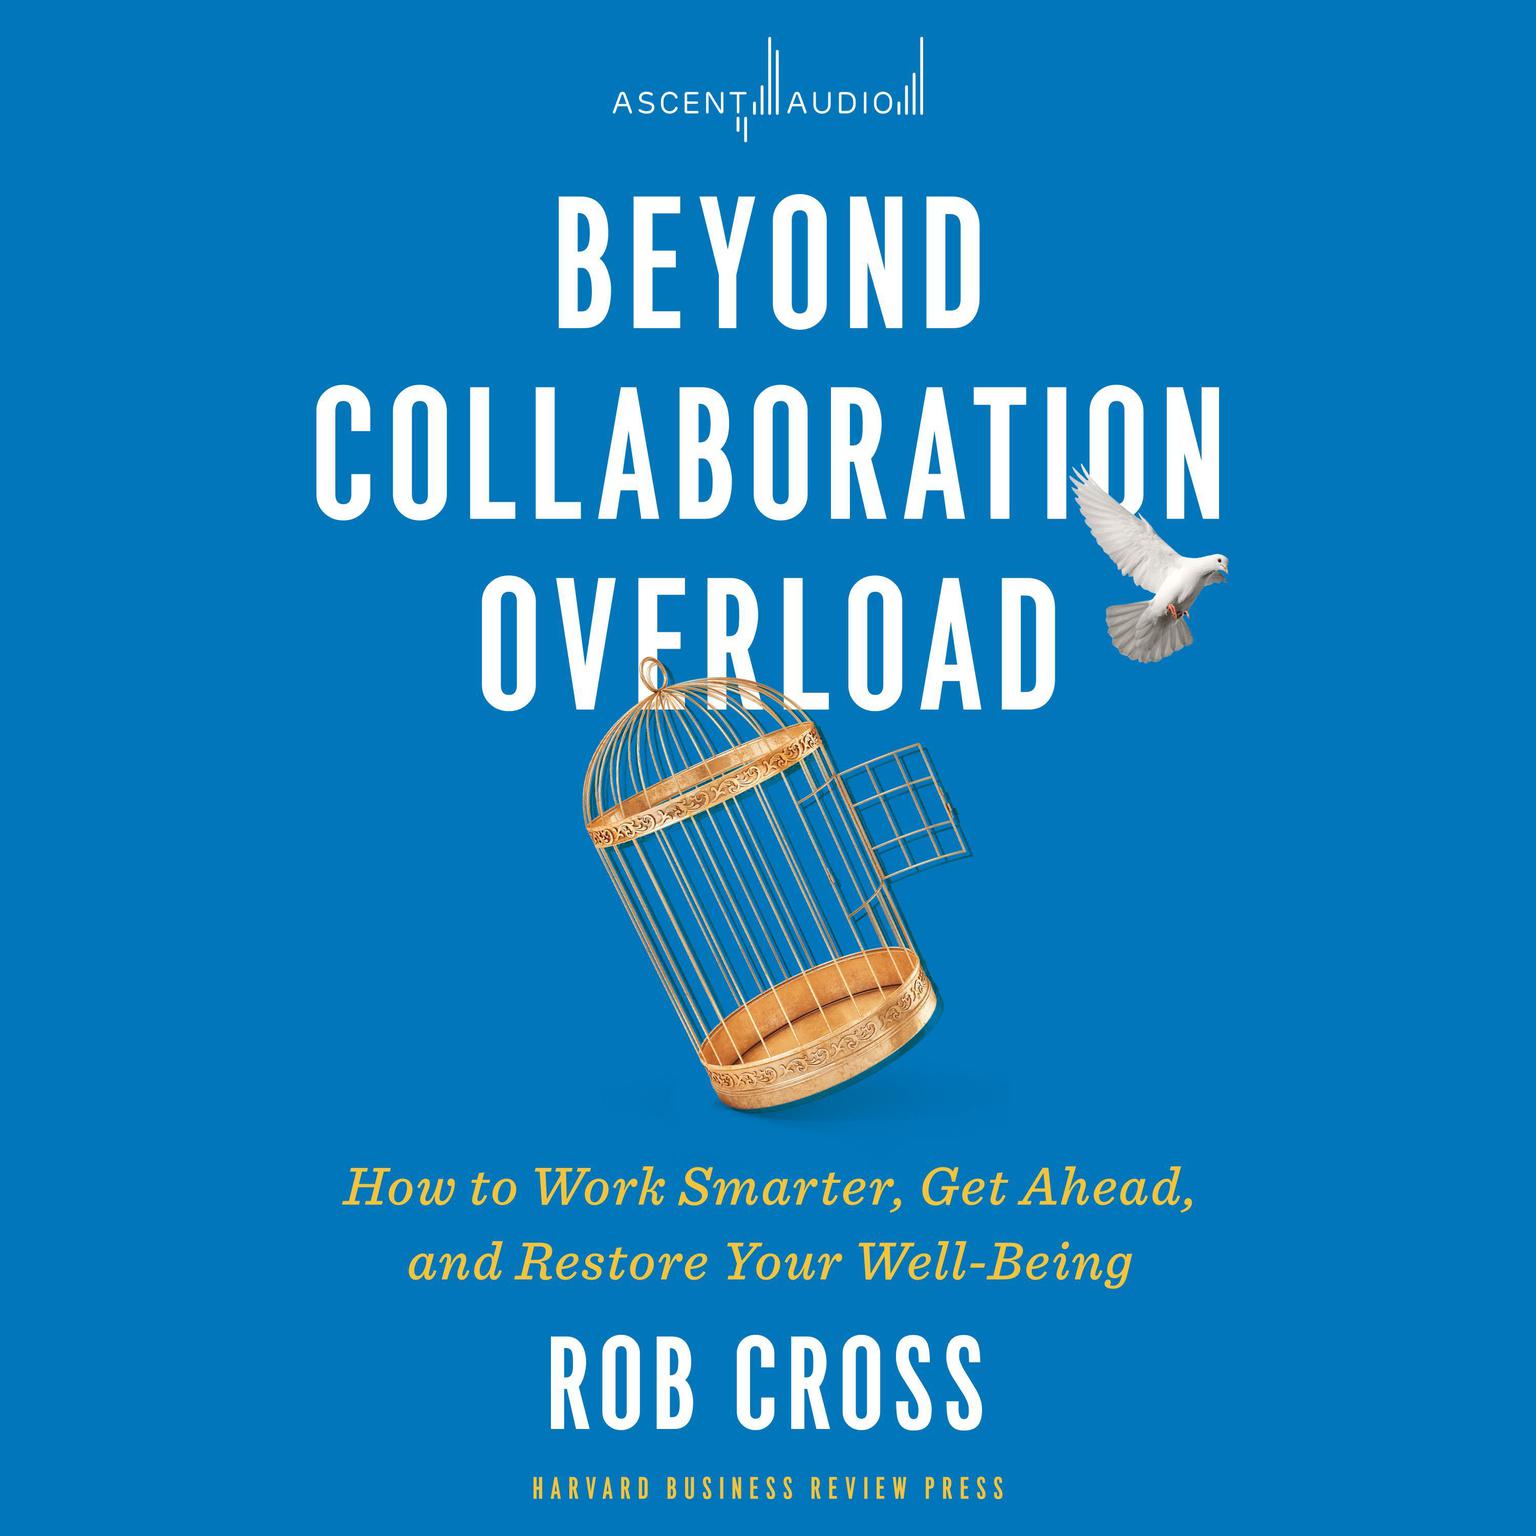 Beyond Collaboration Overload: How to Work Smarter, Get Ahead, and Restore Your Well-Being Audiobook, by Rob Cross